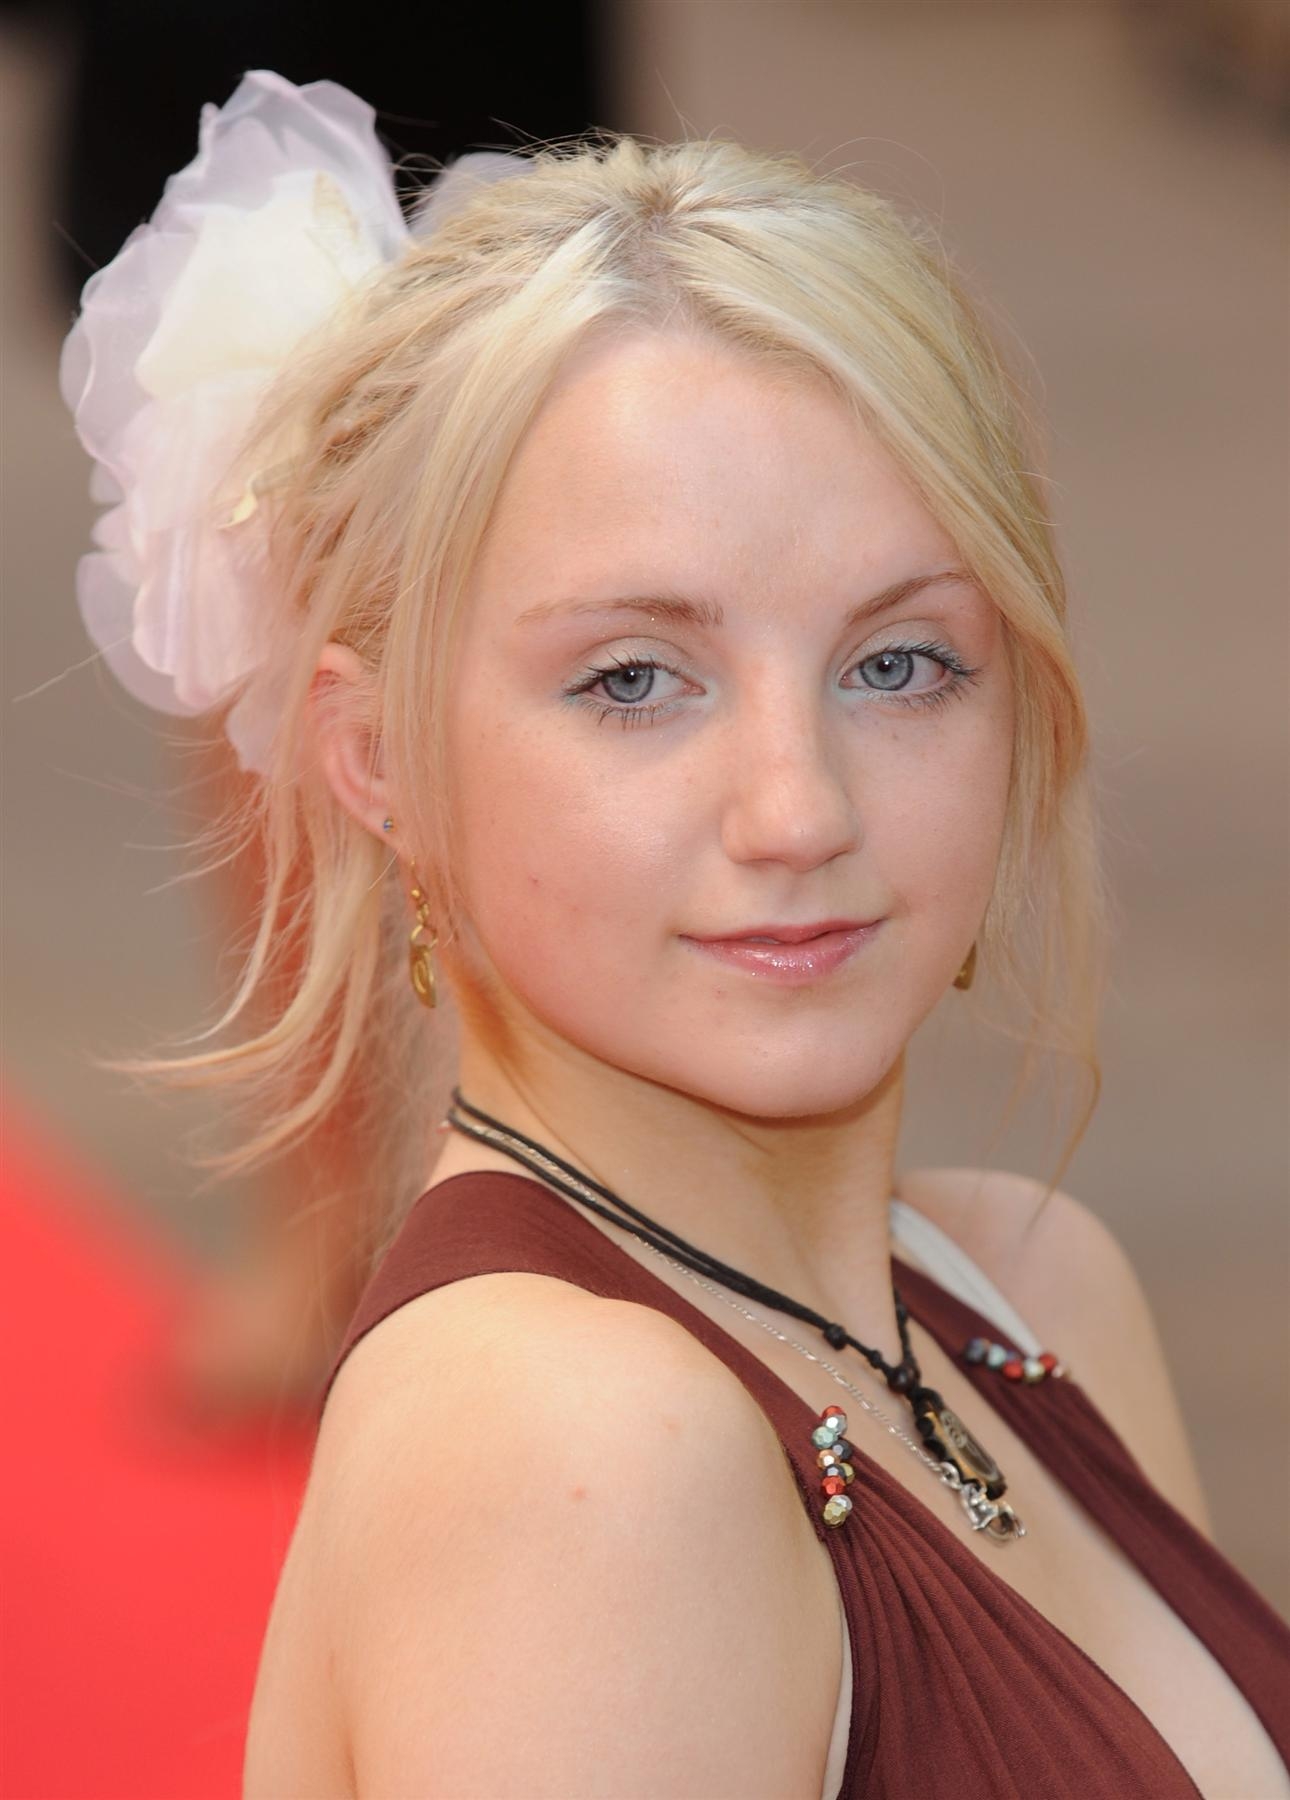 Download Wallpapers Download 1024x1024 evanna lynch